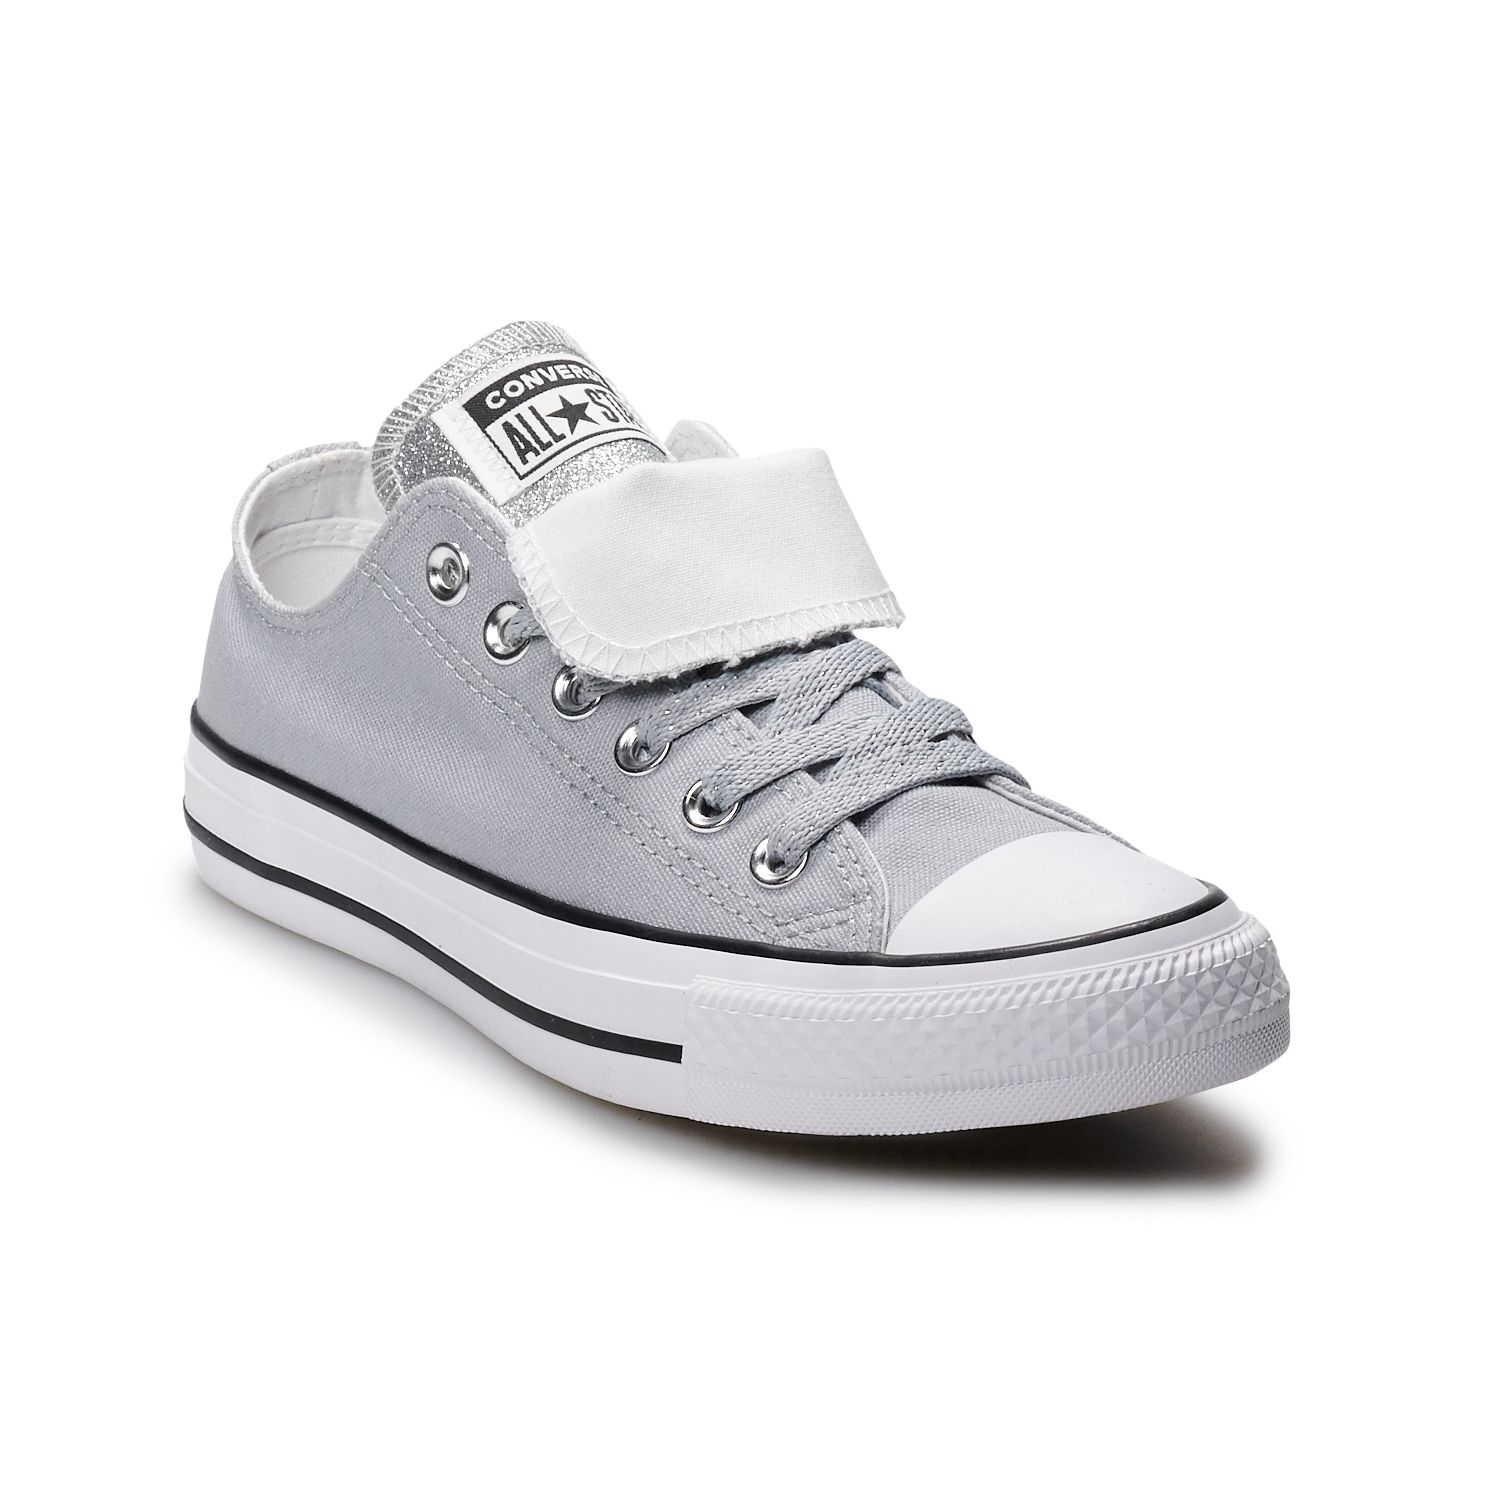 converse all star high tops double tongue